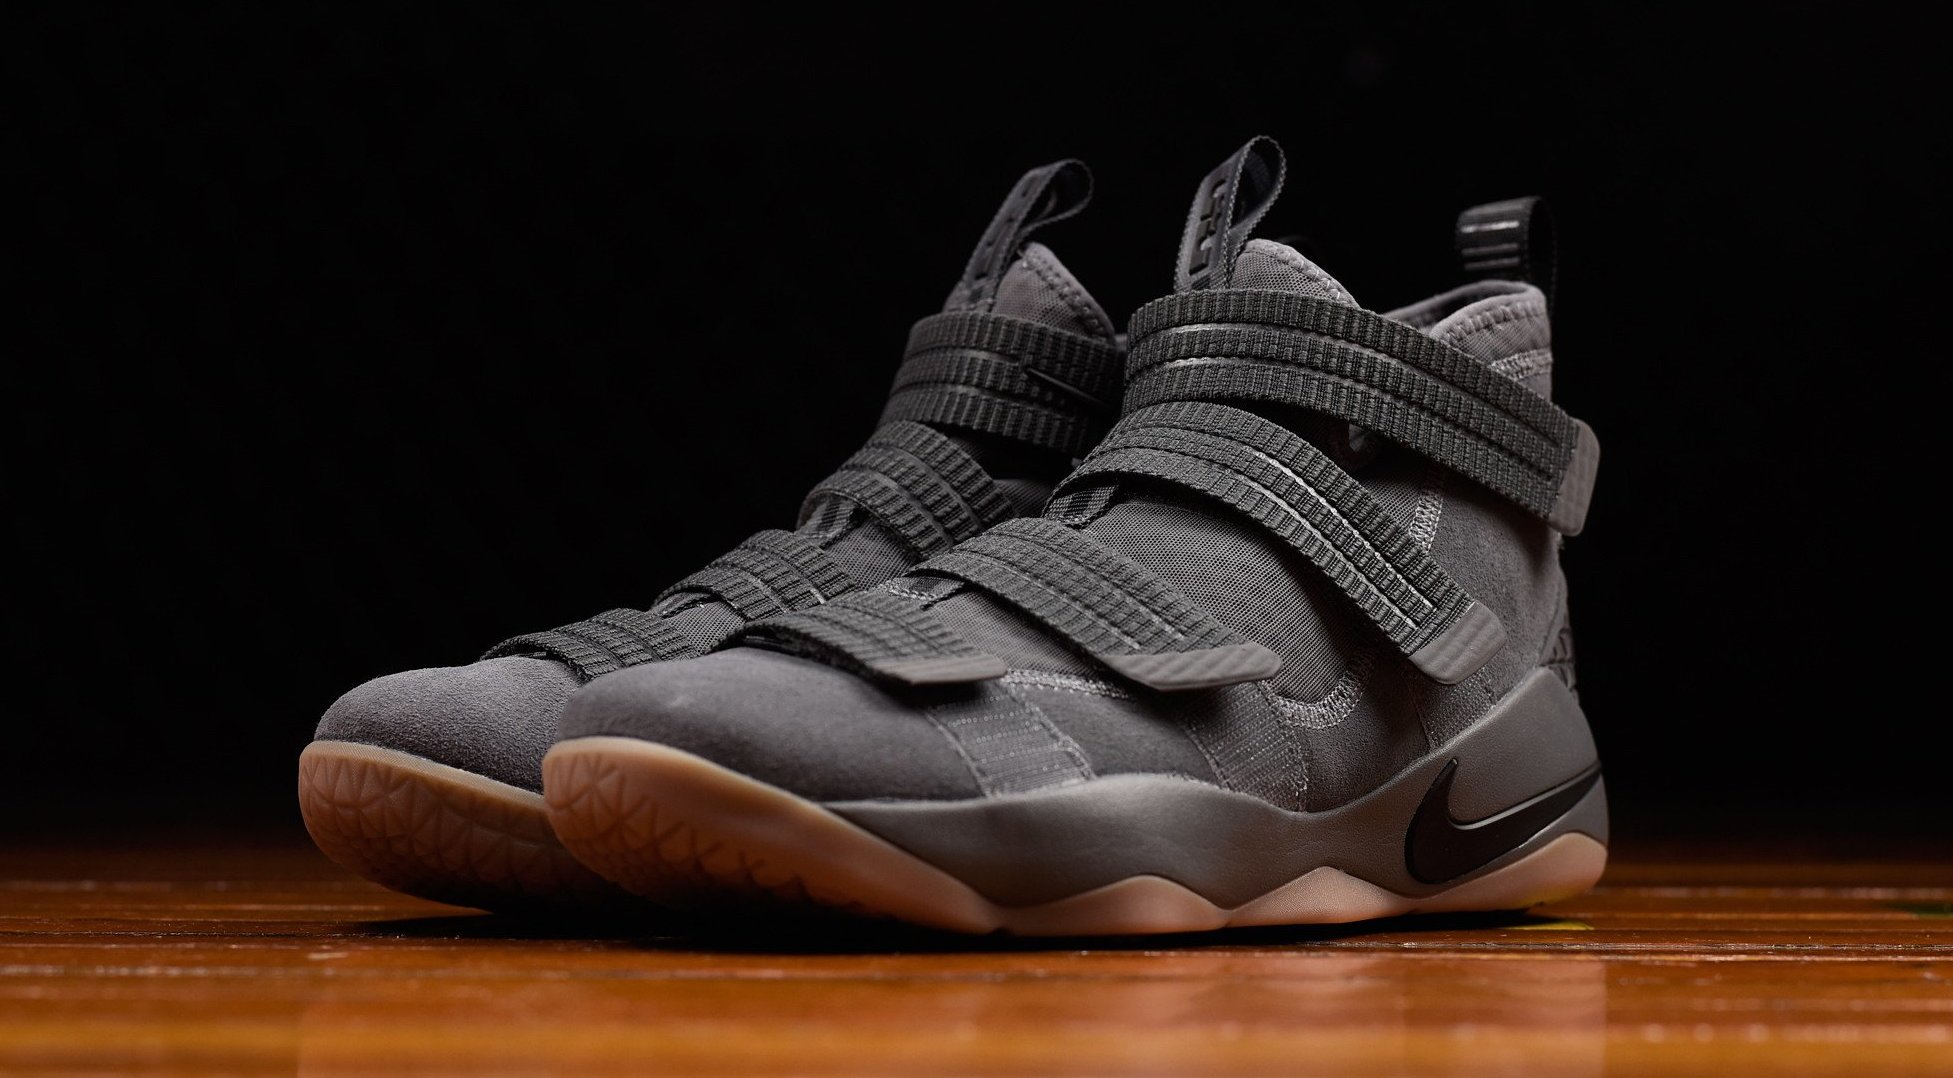 The Nike LeBron Soldier 11 Goes Grey Complex